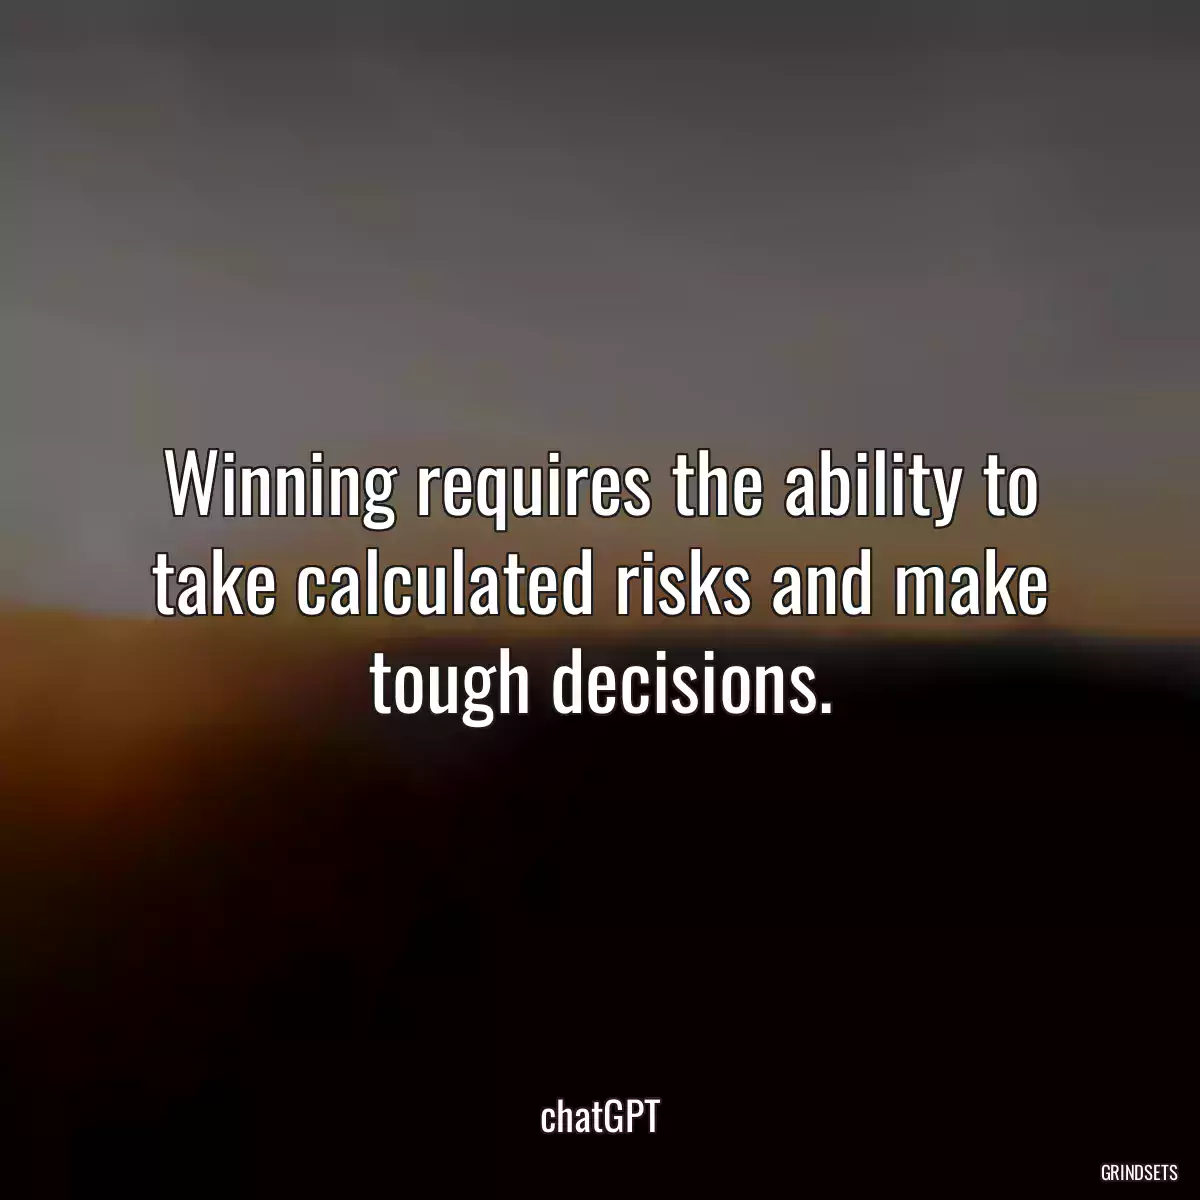 Winning requires the ability to take calculated risks and make tough decisions.